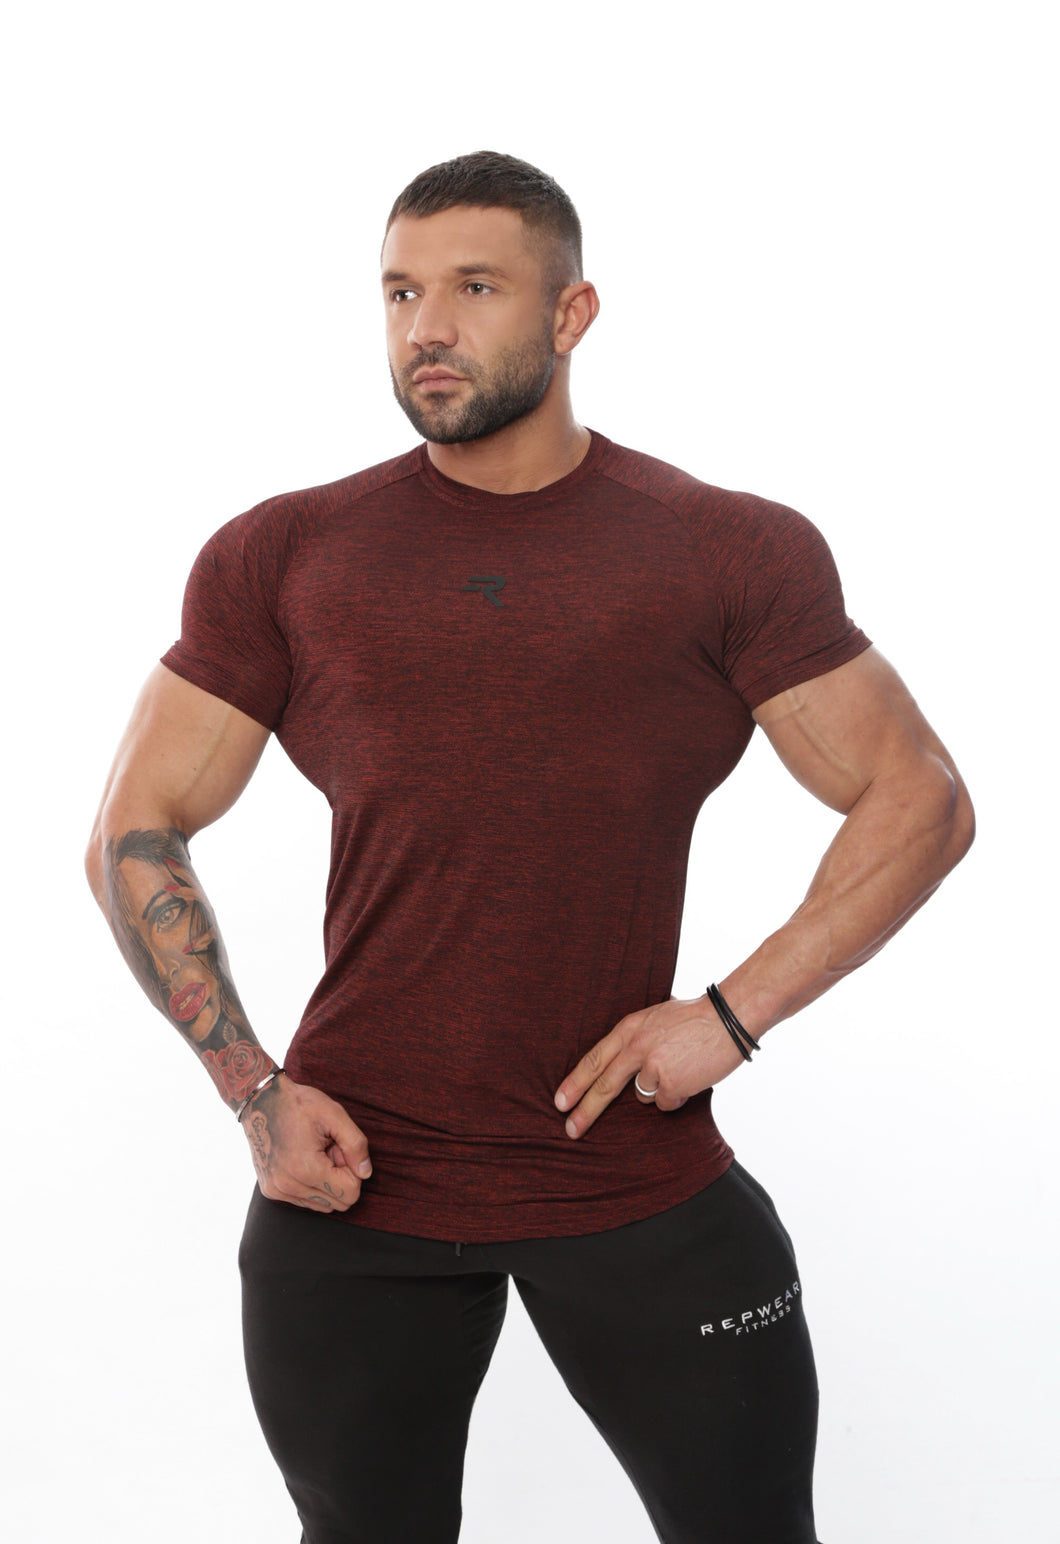 Repwear Fitness HyperFuse Tshirt Ox Red - Repwear Fitness